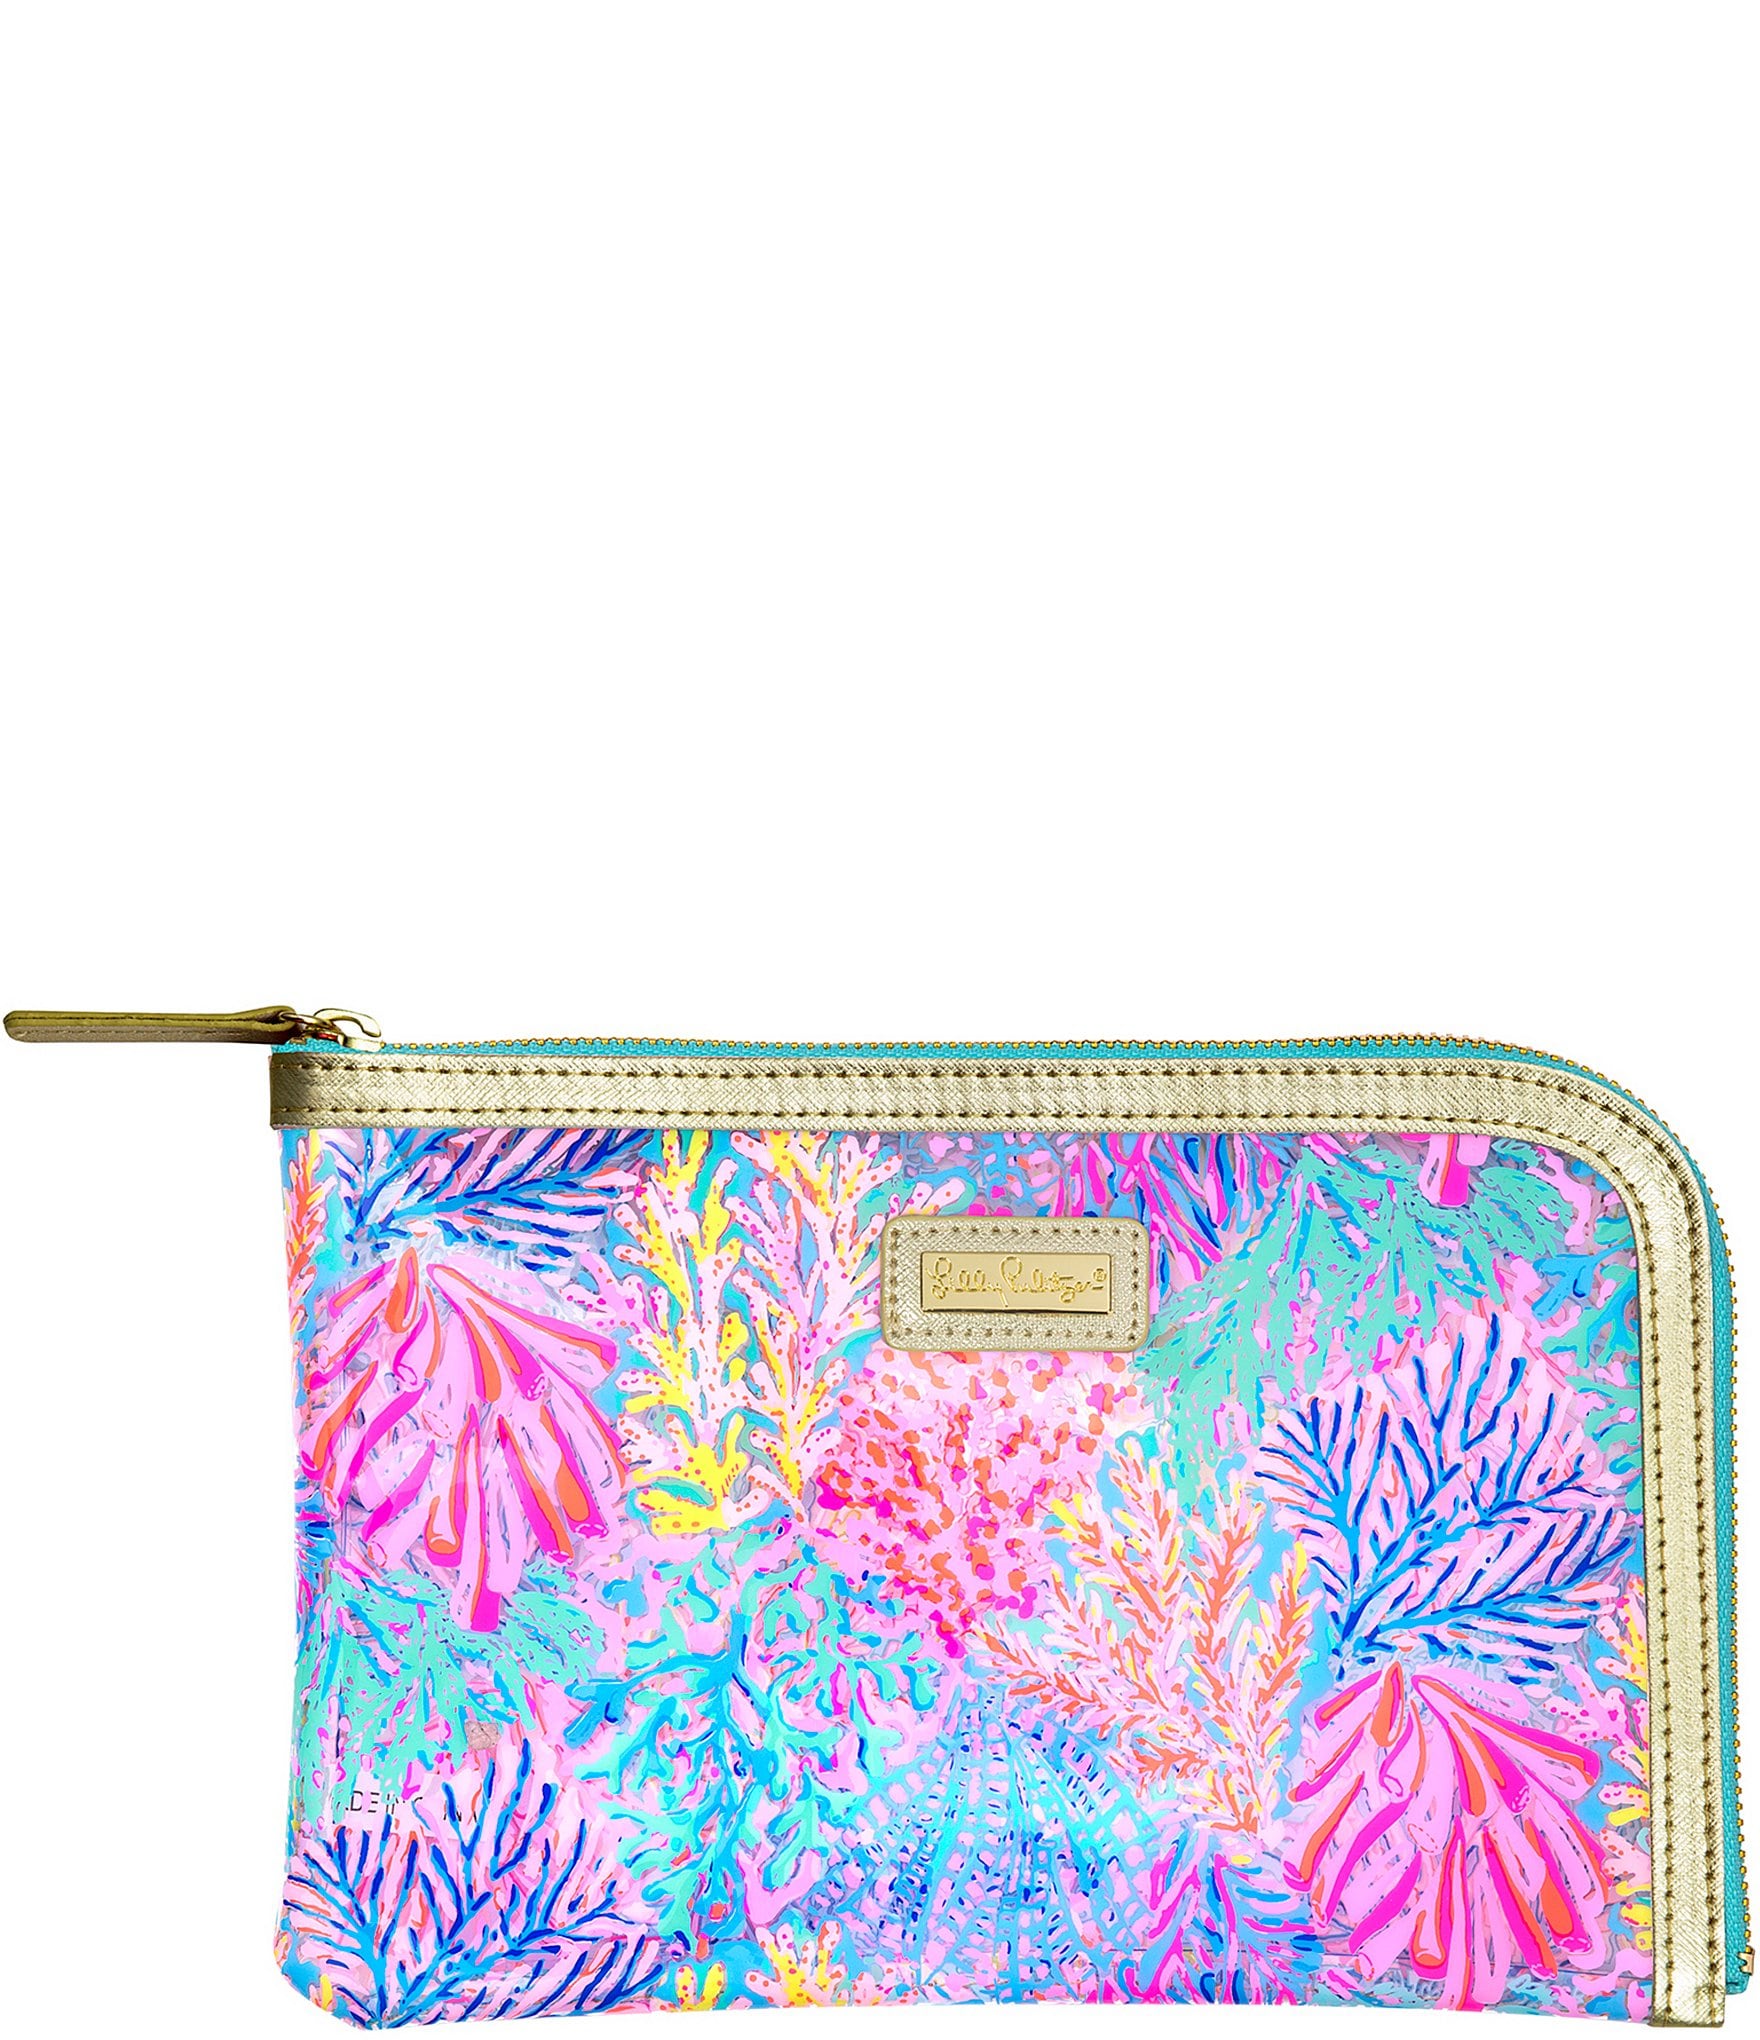 it's all good: Battle of the Agendas: Kate Spade v. Lilly Pulitzer